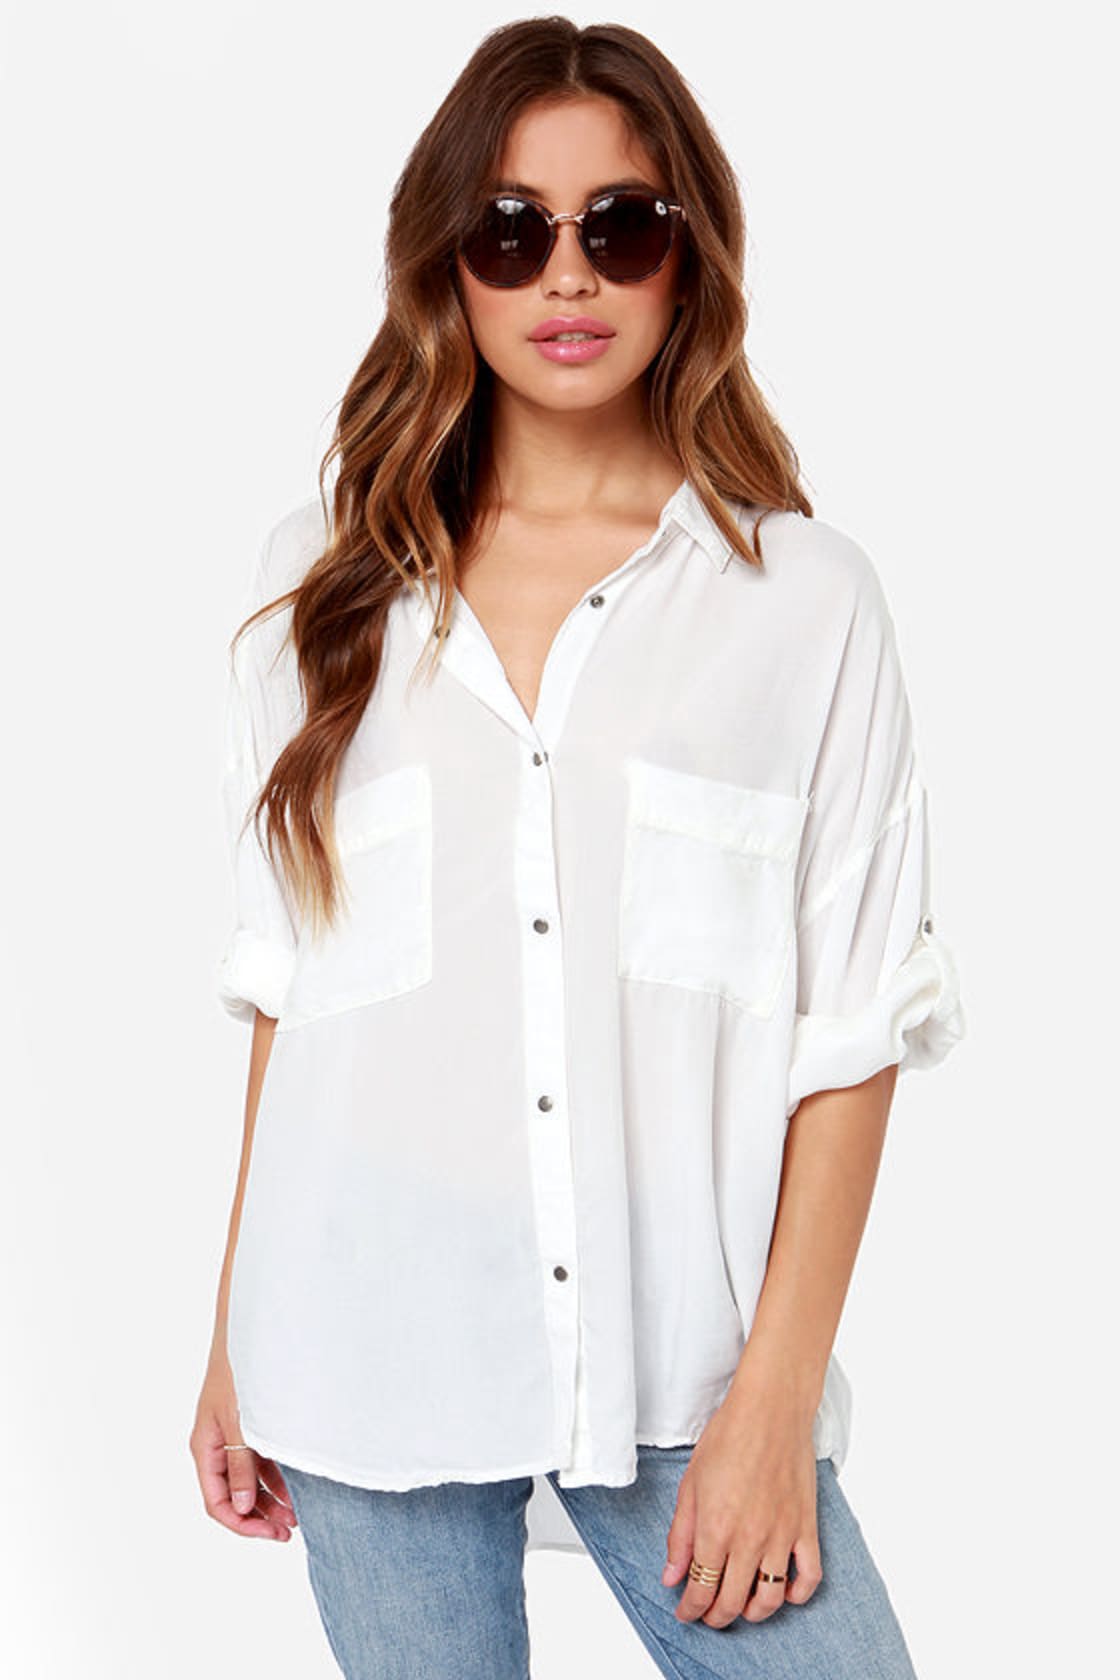 Cute Ivory Top - Ivory Shirt - Button-Up Top - $67.00 - Lulus